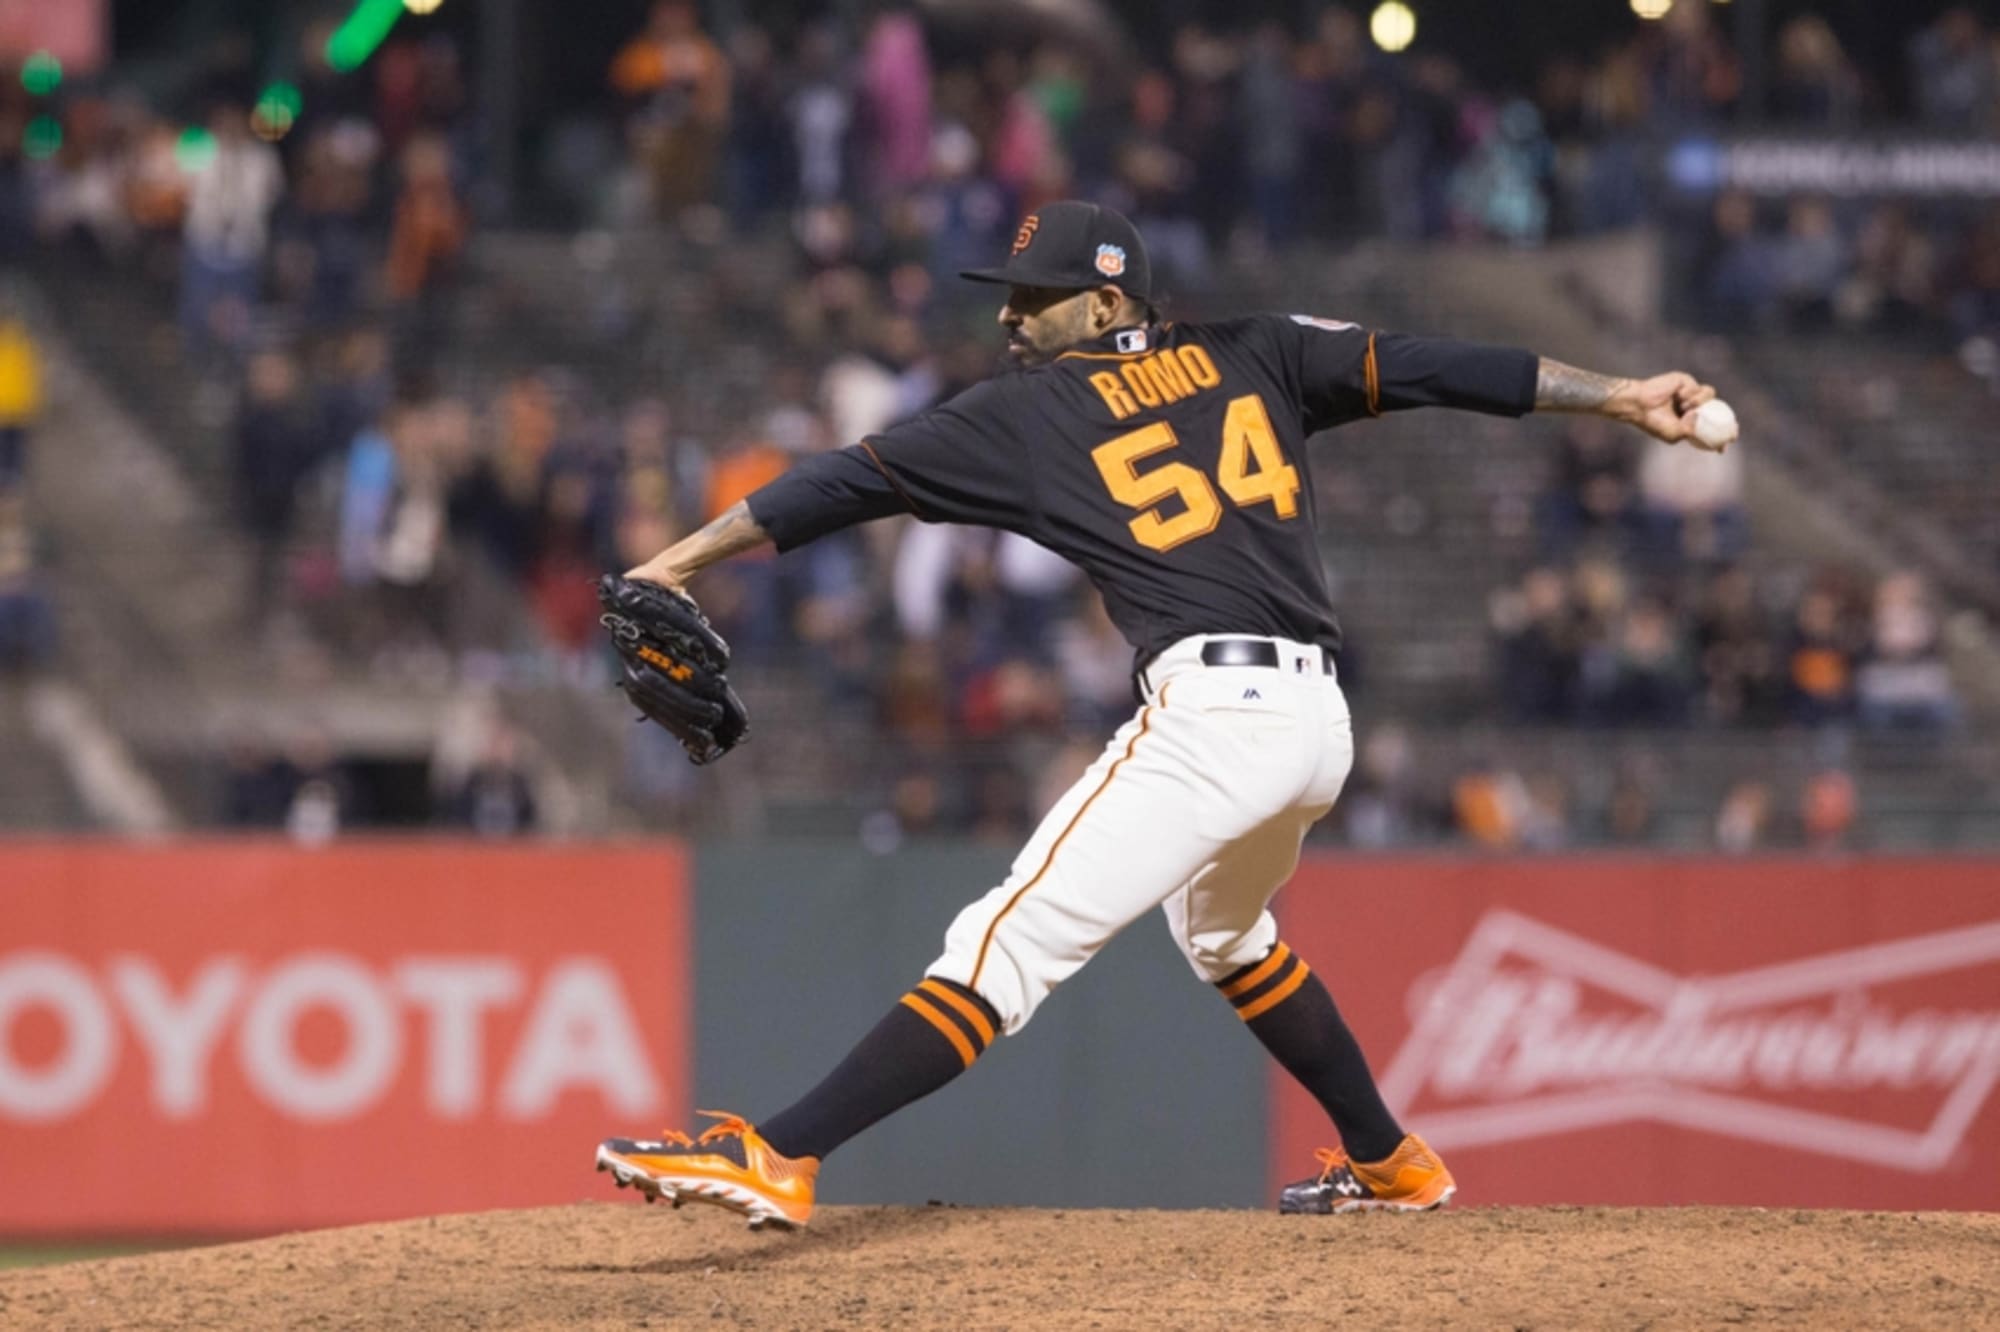 San Francisco Giants: Potential Replacements if Romo Needs DL Time